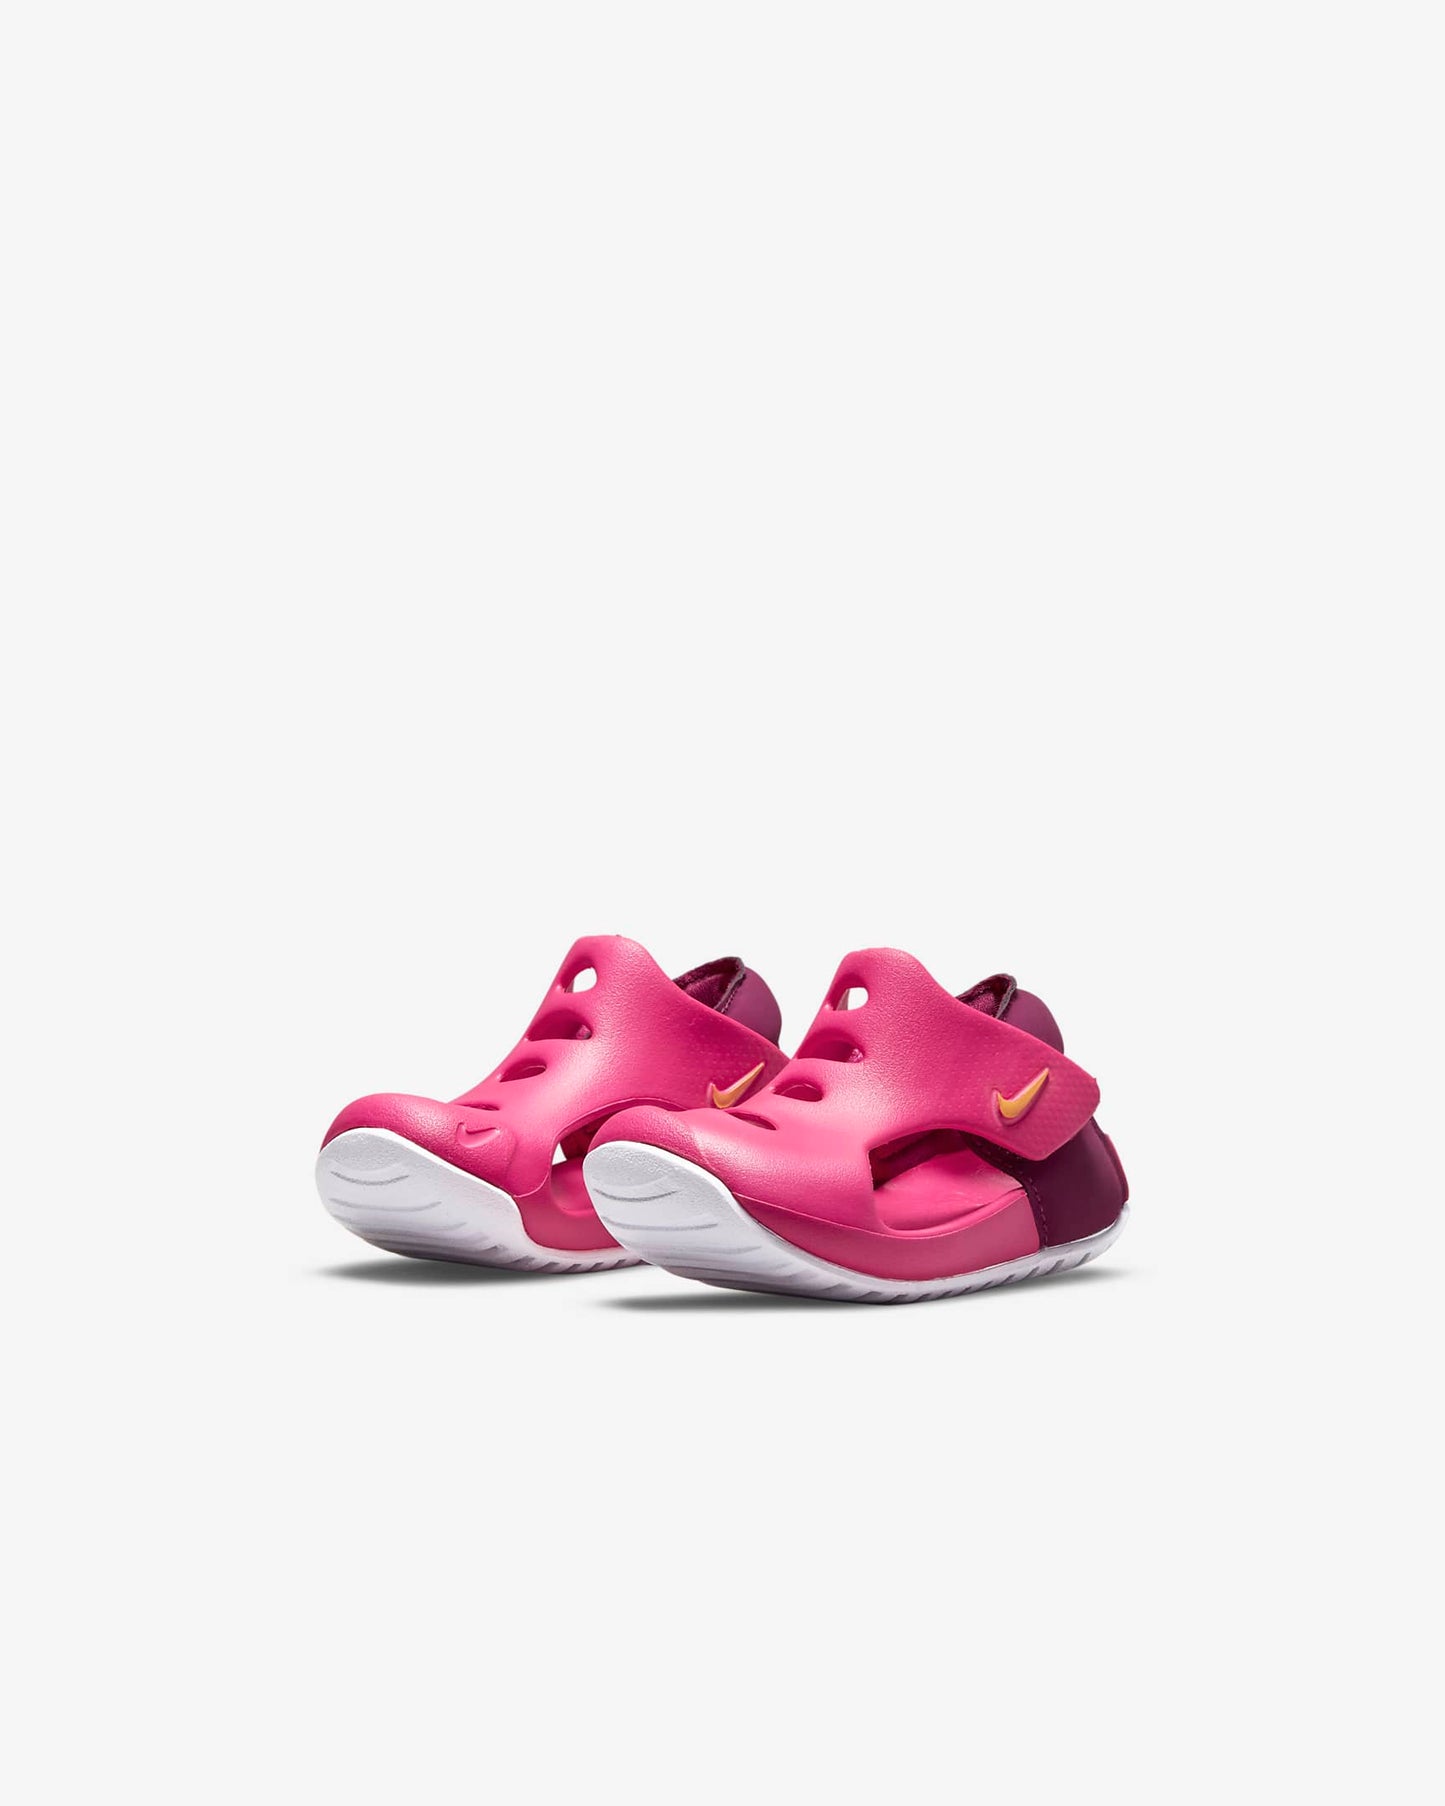 Nike Sunray Protect 3 Toddler Pink (DH9465-602) - DH - R1L10